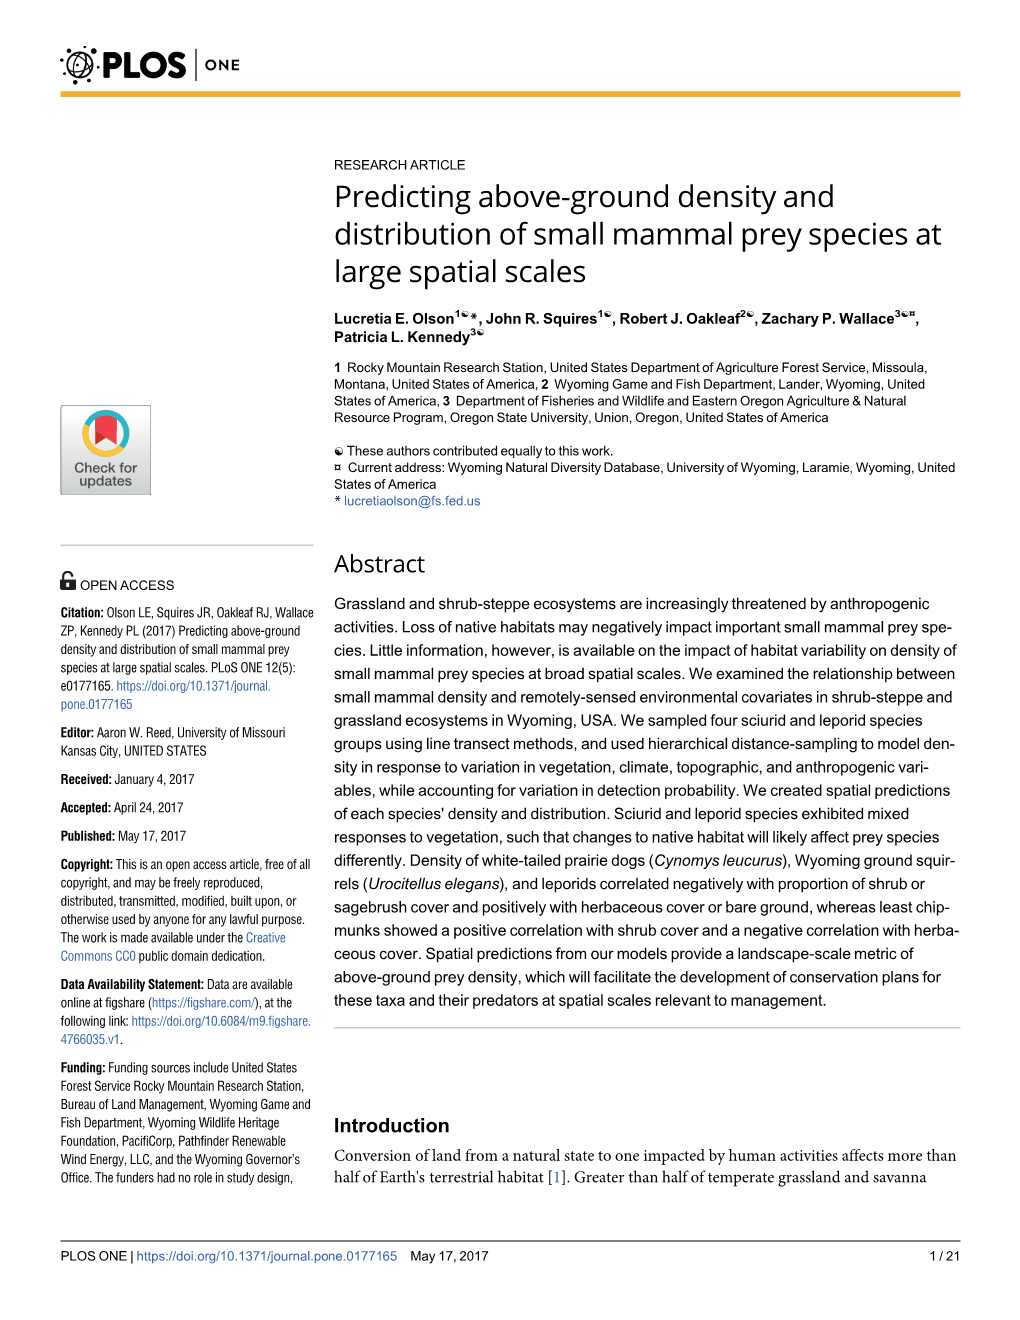 Predicting Above-Ground Density and Distribution of Small Mammal Prey Species at Large Spatial Scales